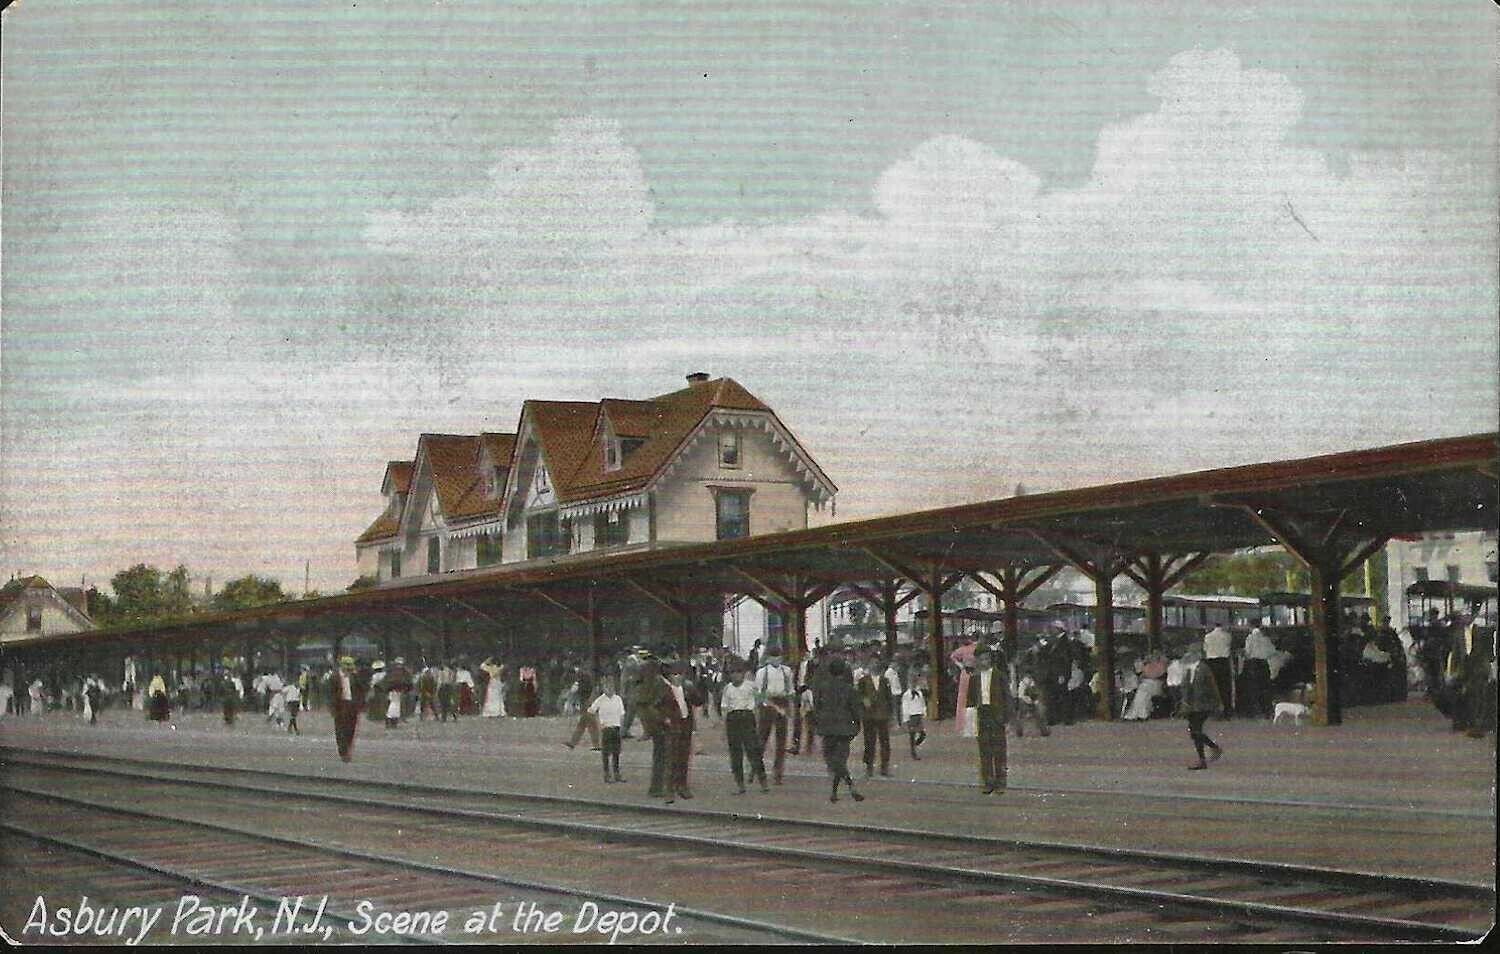 The Scene at the Depot, Train Station, Asbury Park, N.J., Very Early Postcard